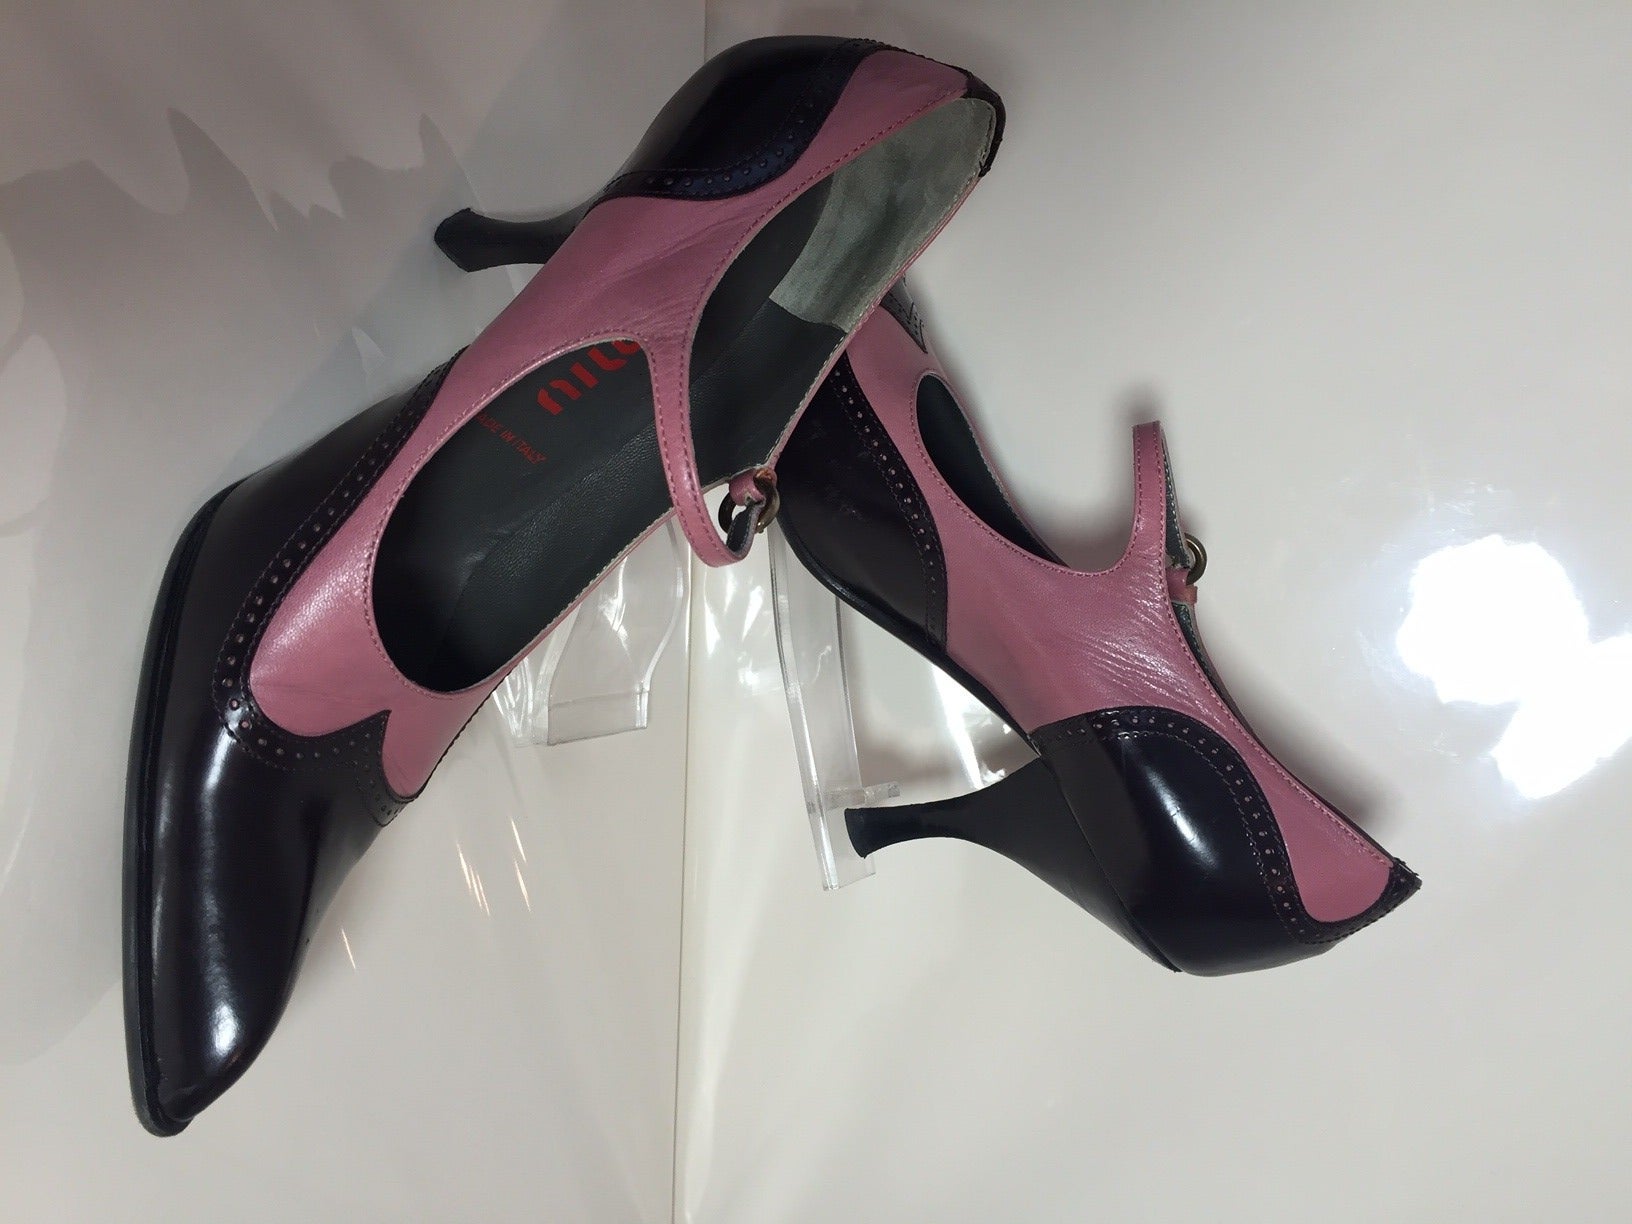 Fabulous Miu Miu pink and black leather Mary Jane buckle strap pumps in a spectator style with a peaked and pointed toe.